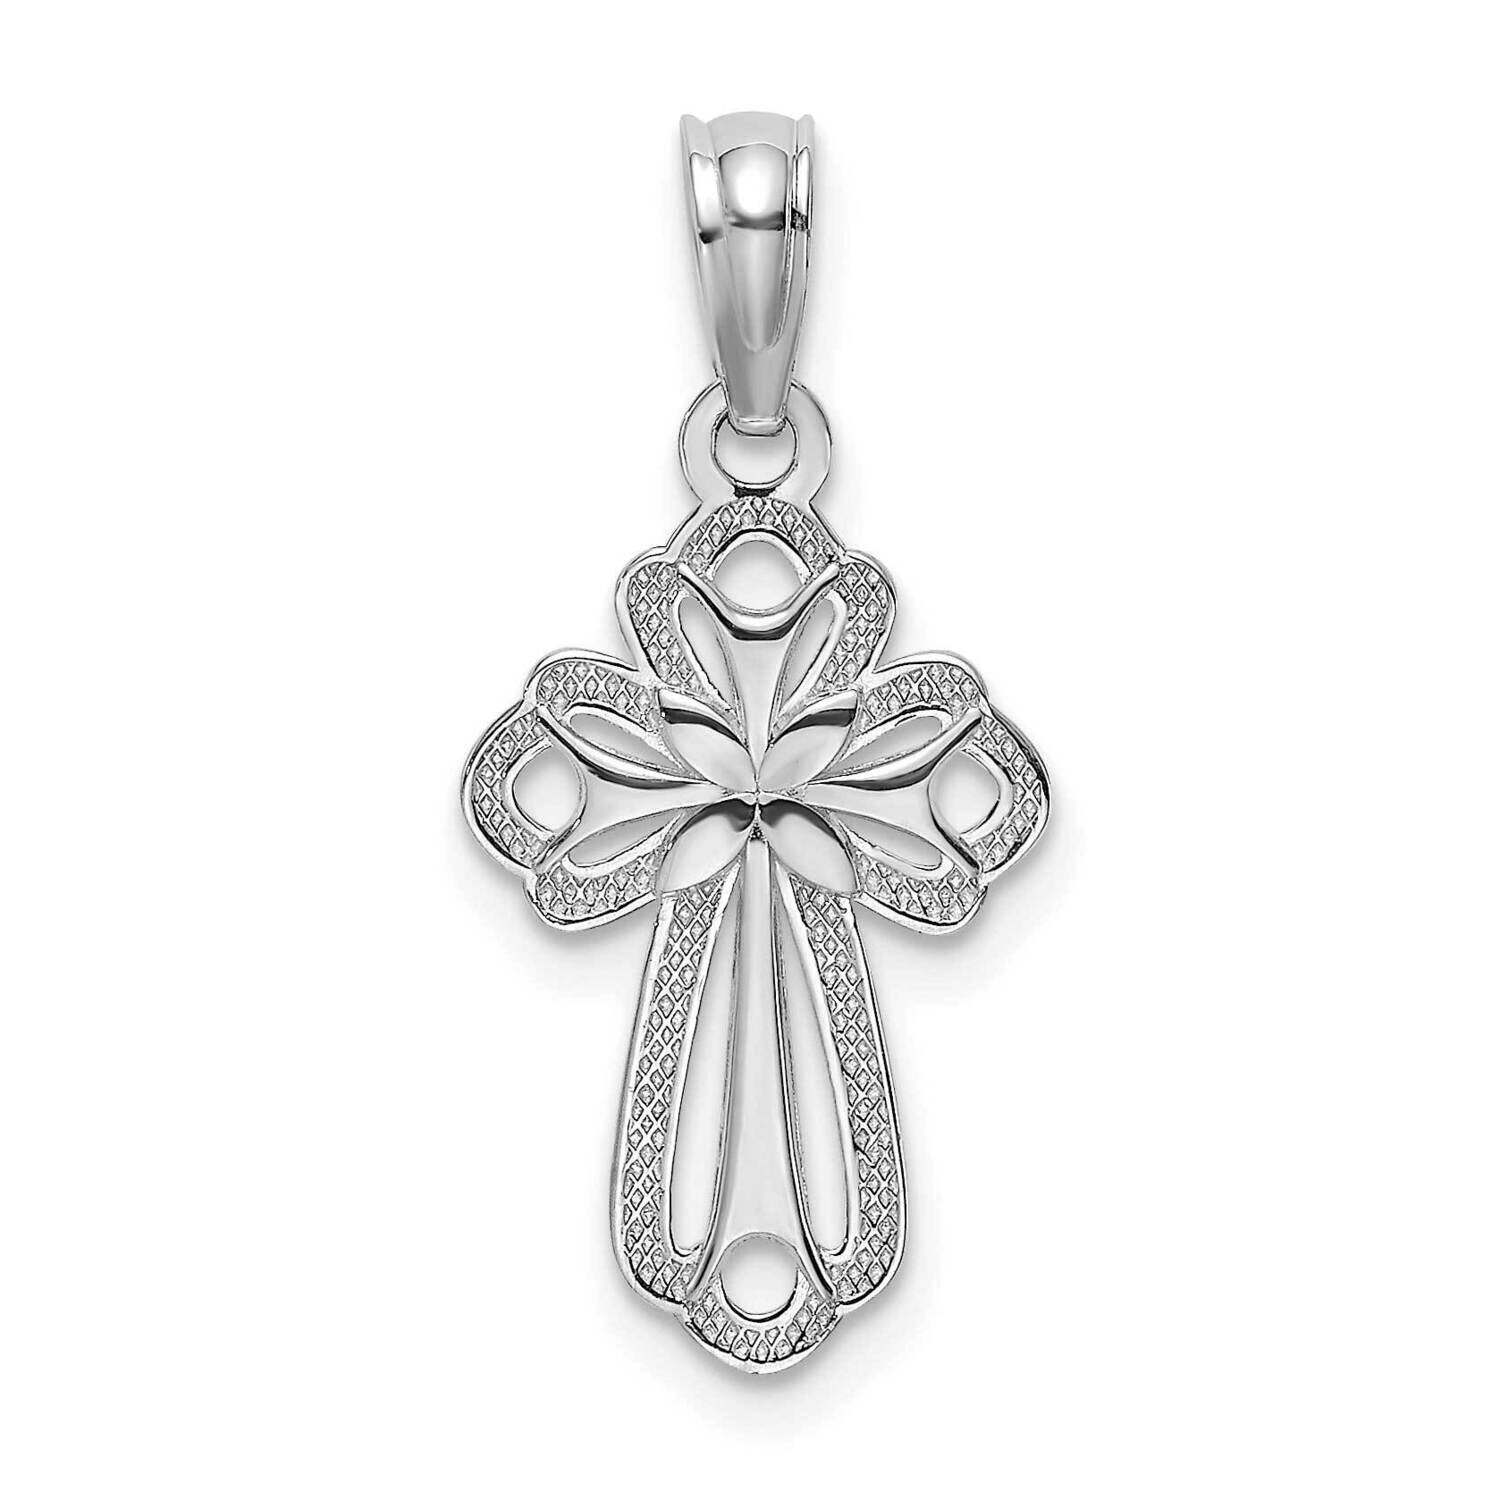 Cut-Out Polished Textured Cross Charm 14k White Gold K8339W